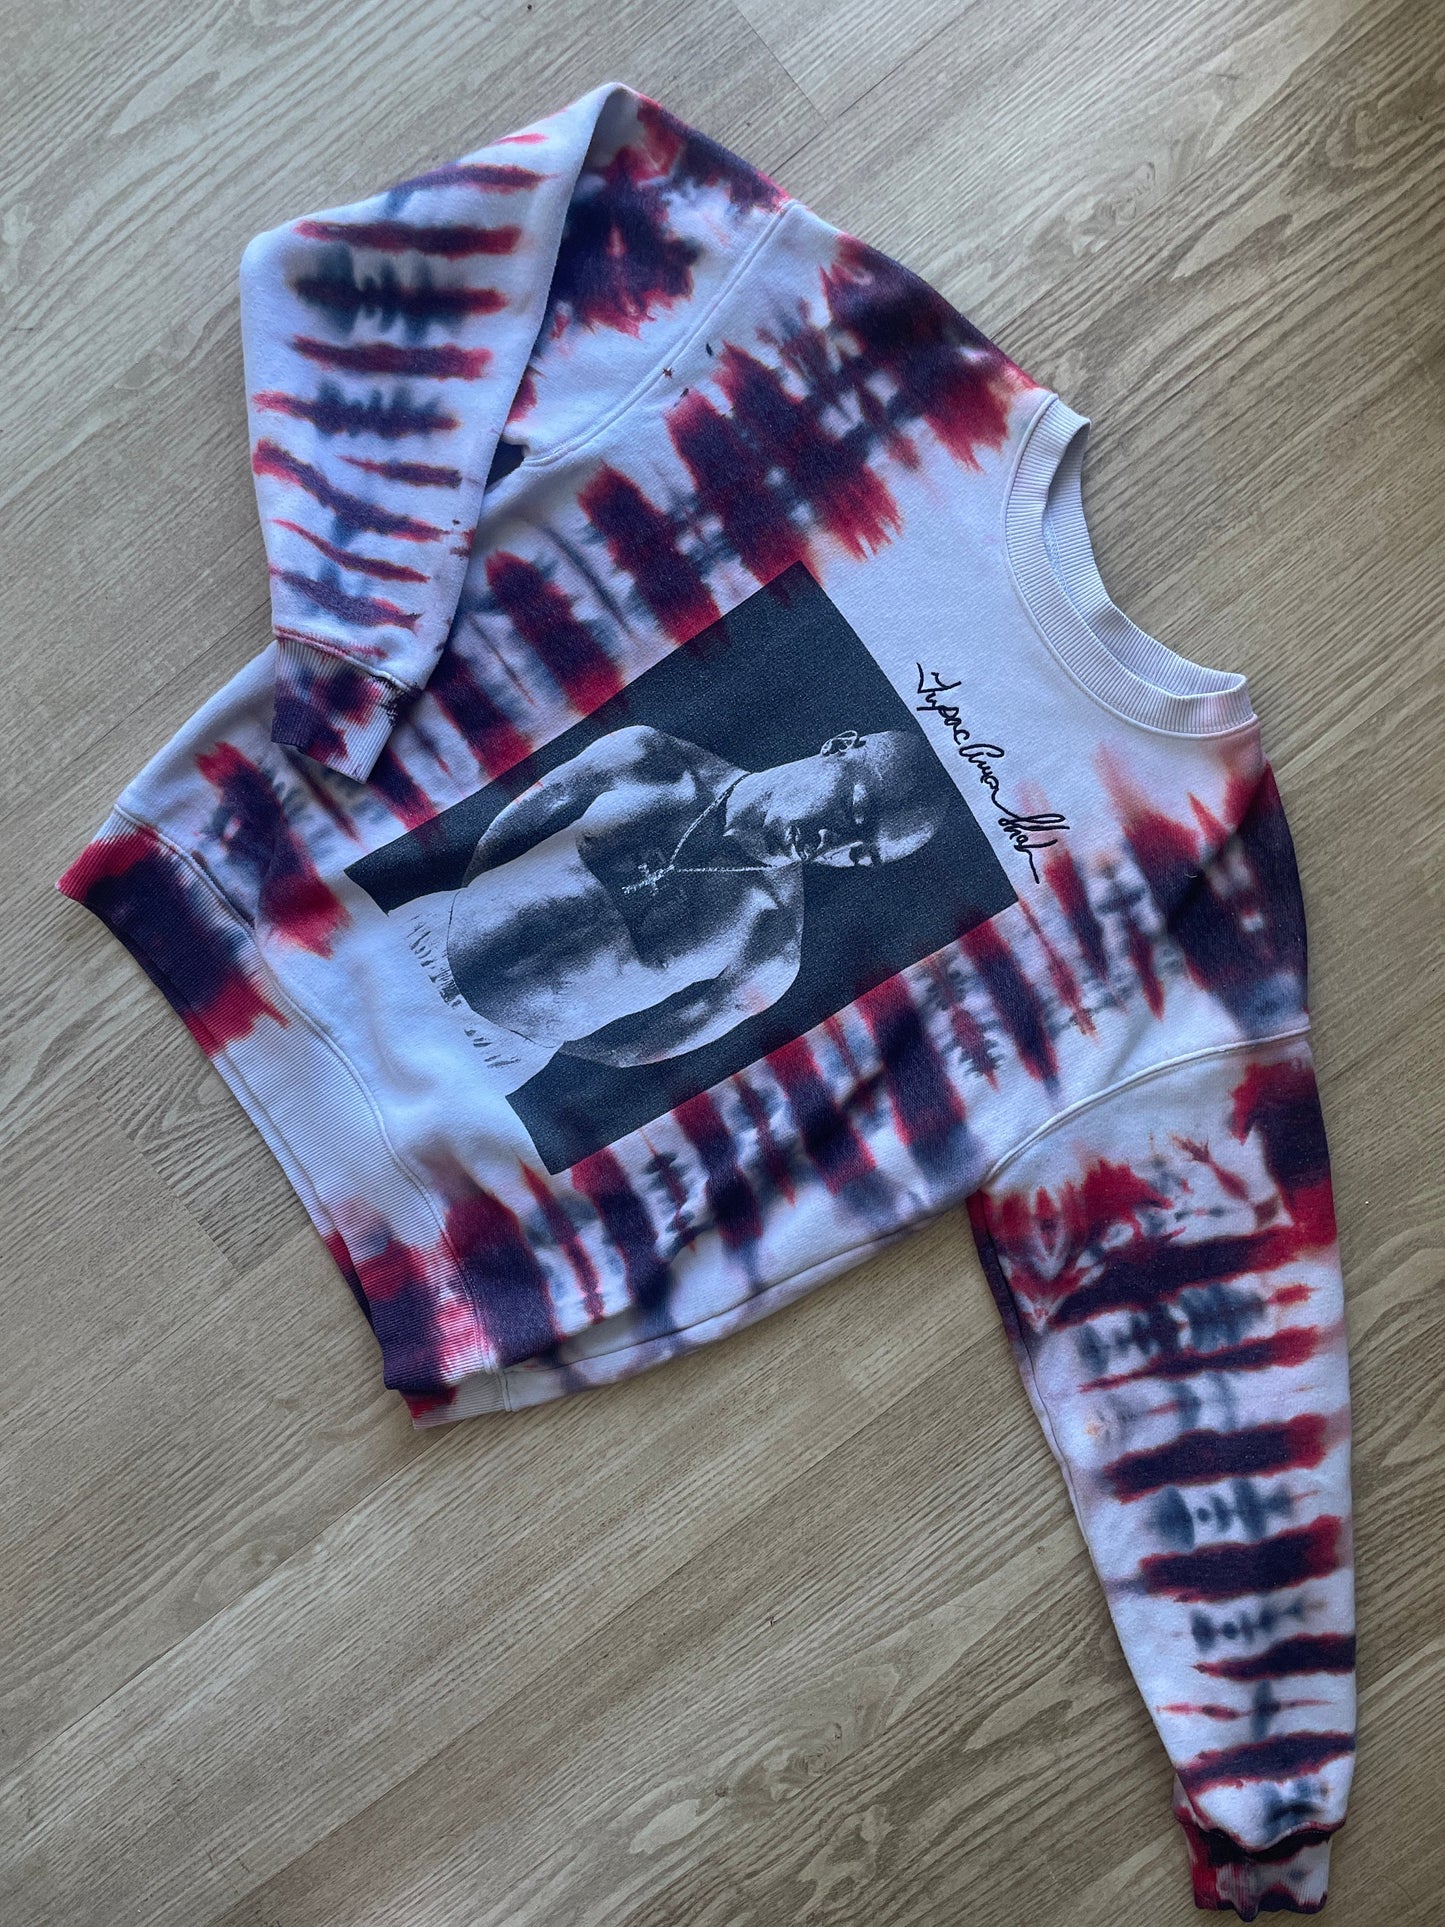 SMALL Women's 2Pac Tupac Shakur Handmade Tie Dye Long Sleeve Sweatshirt | One-Of-a-Kind Upcycled White, Black, and Red Crewneck